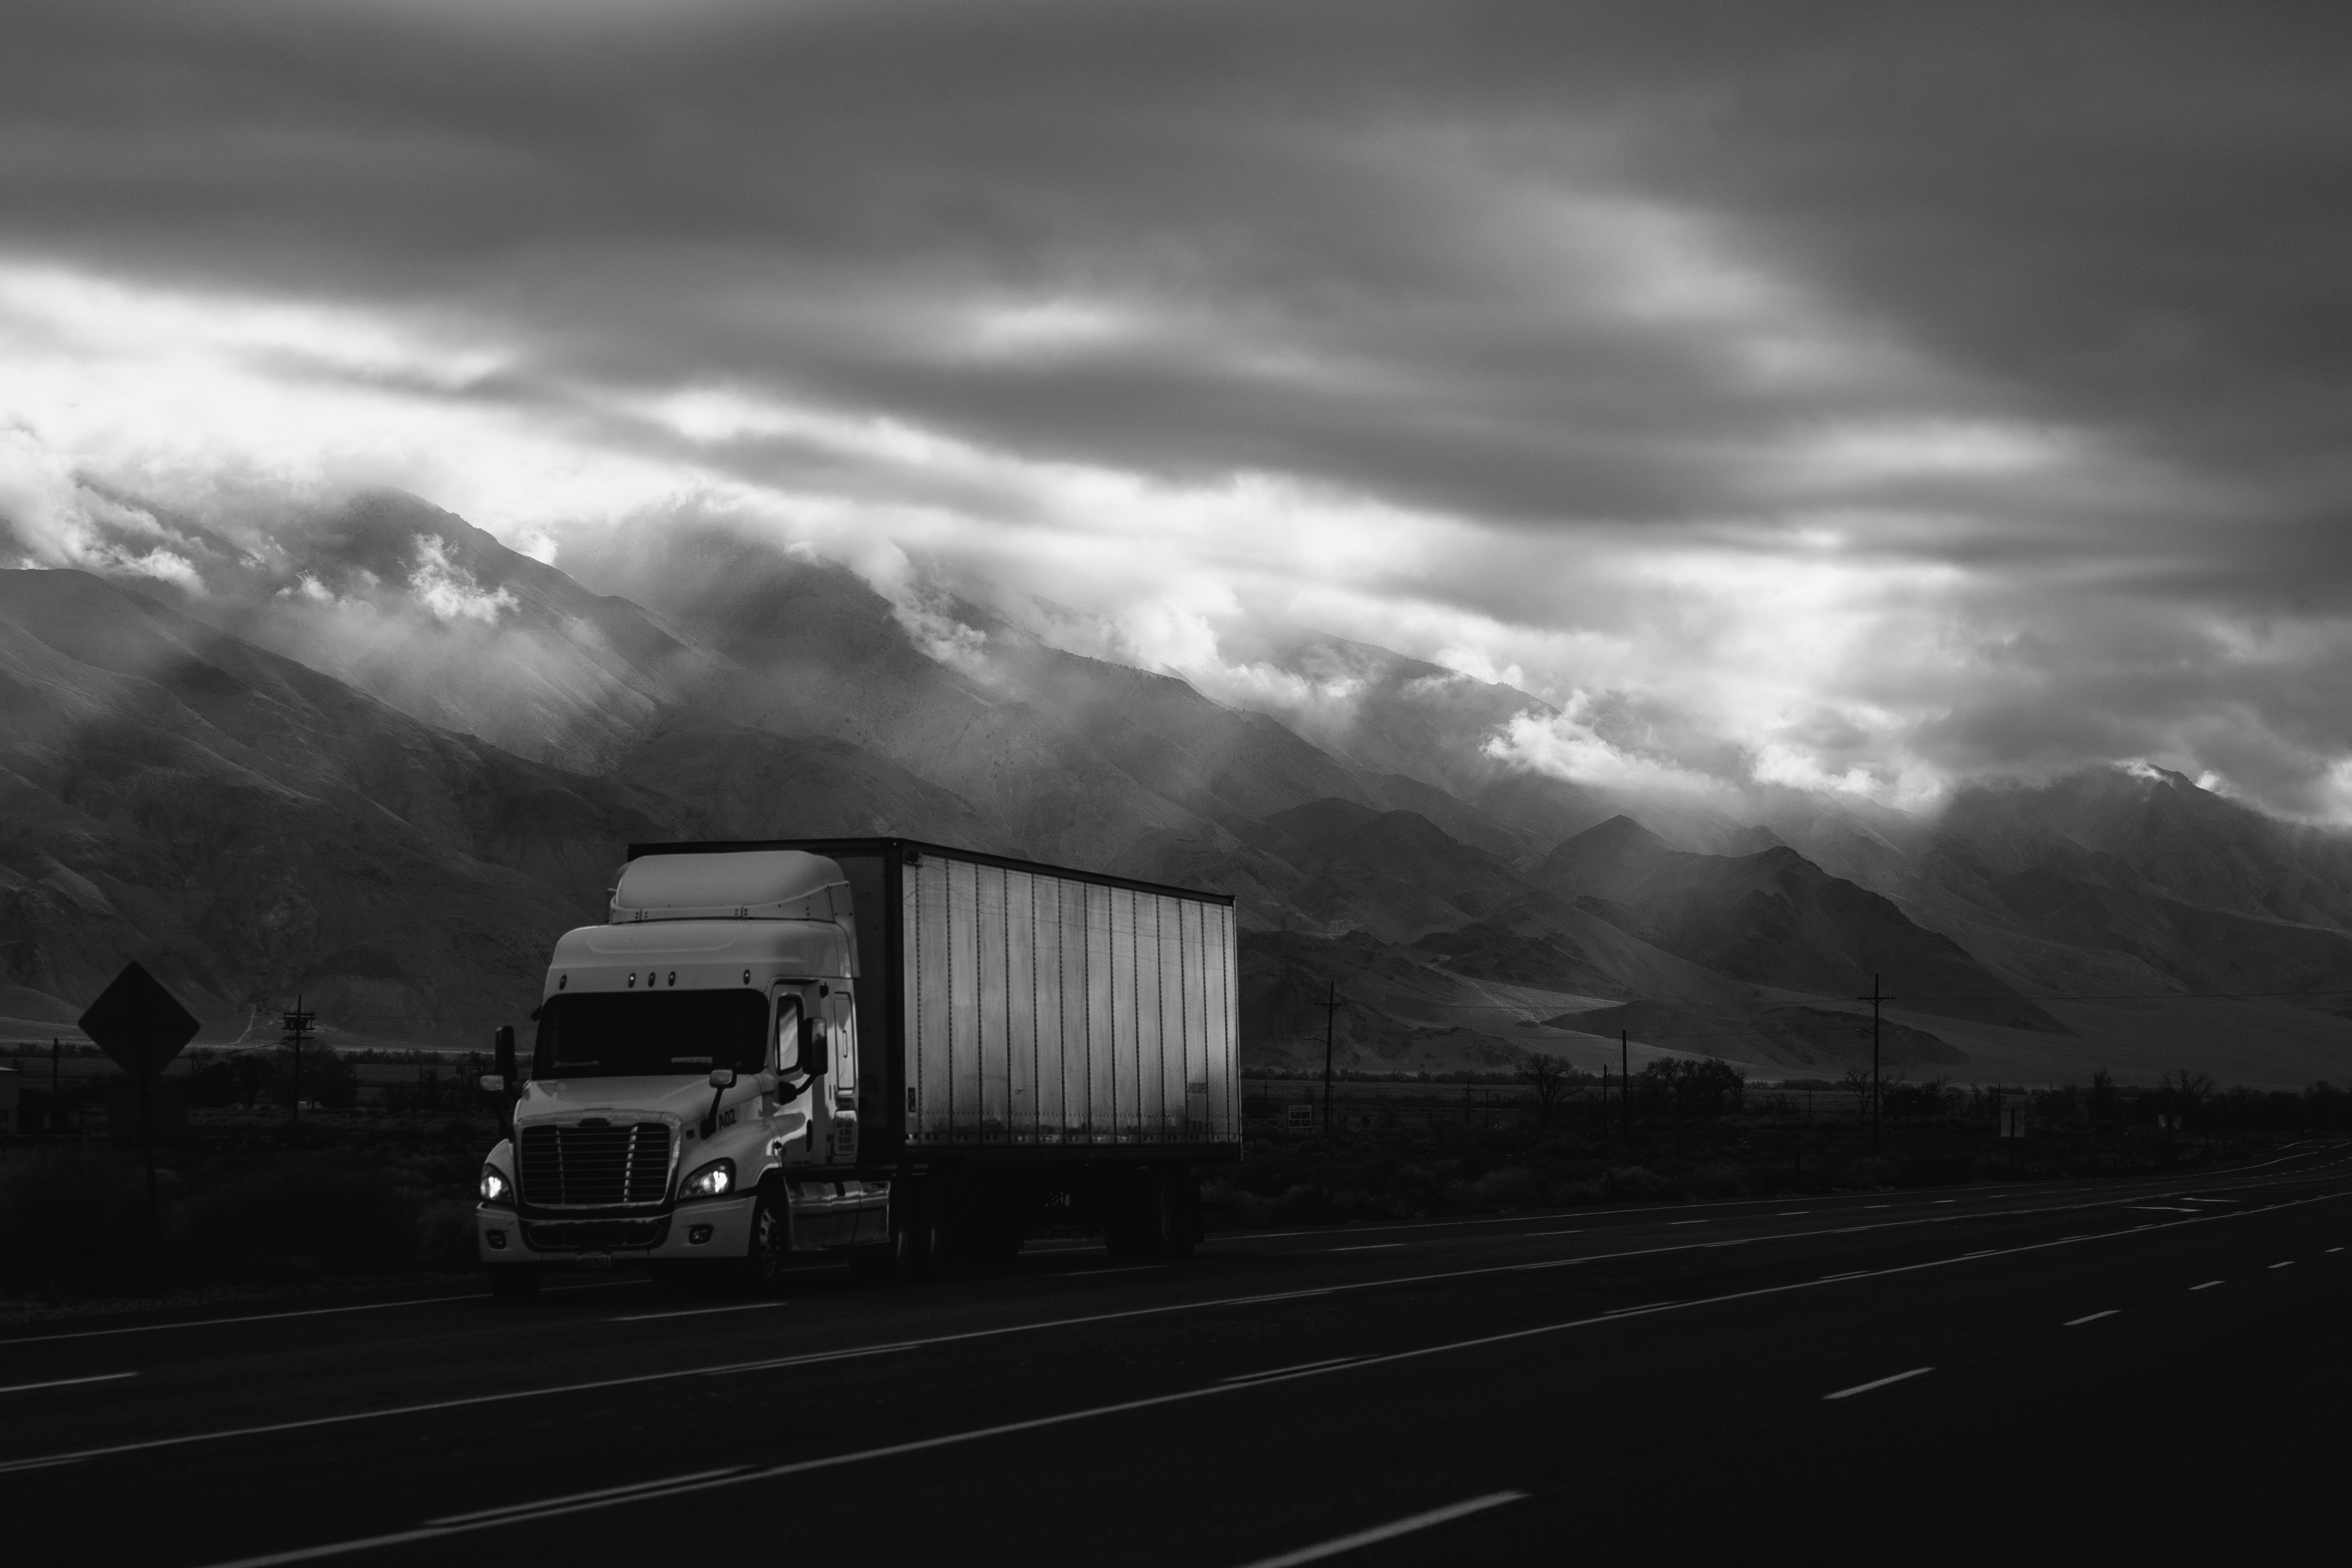 An American truck drives down the highway in a monochrome photo